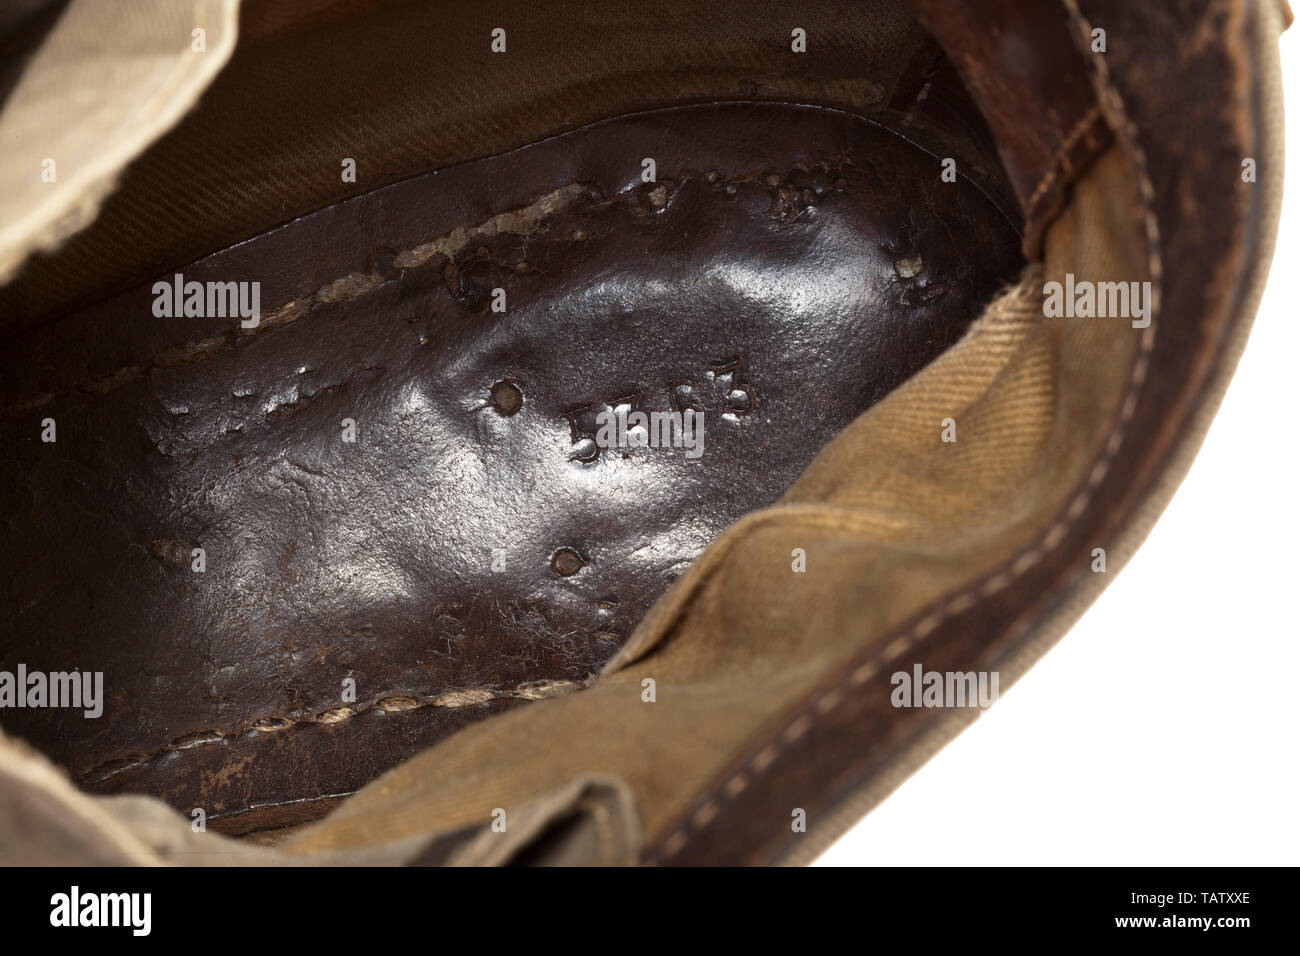 A pair of shoes to the tropical uniform for army members, Lower parts and reinforcements in smooth, brown leather, khaki-coloured canvas shafts with black painted iron eyelets (filmed with rust) and hooks for lacing. The inner sole stamped '5363'. Several of the nails are missing from the sole. historic, historical 20th century, Additional-Rights-Clearance-Info-Not-Available Stock Photo